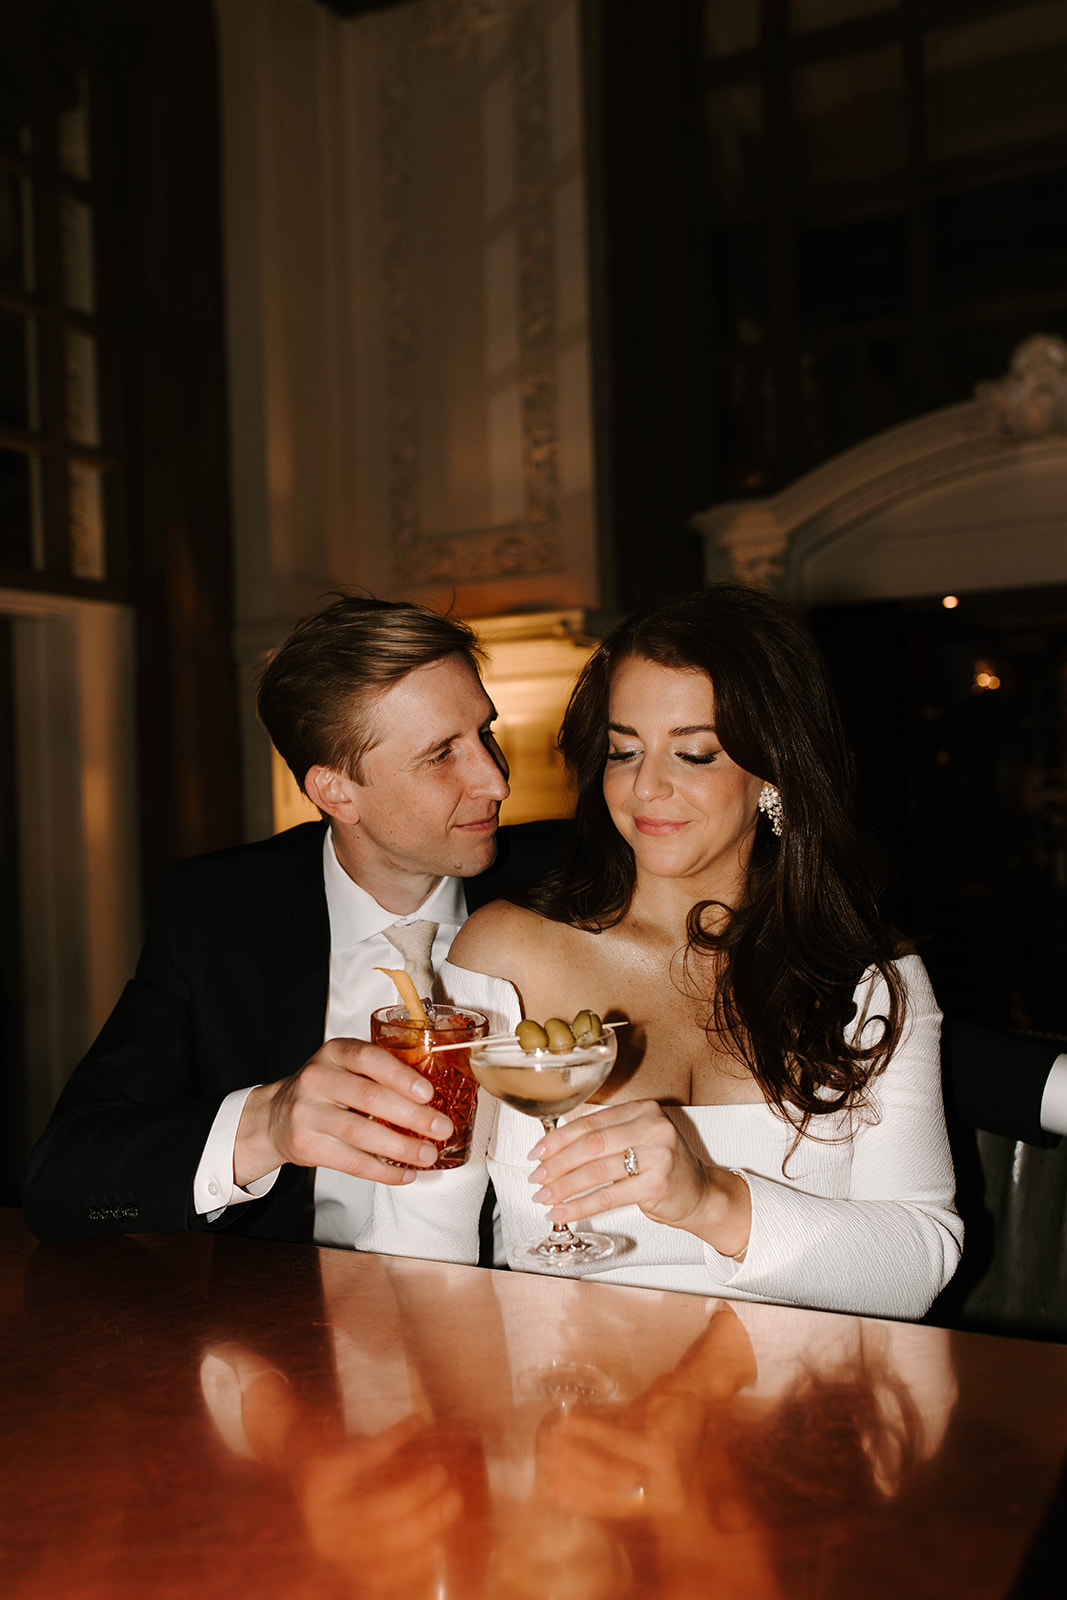 Stunning new couple share drinks together after their Boston wedding day!